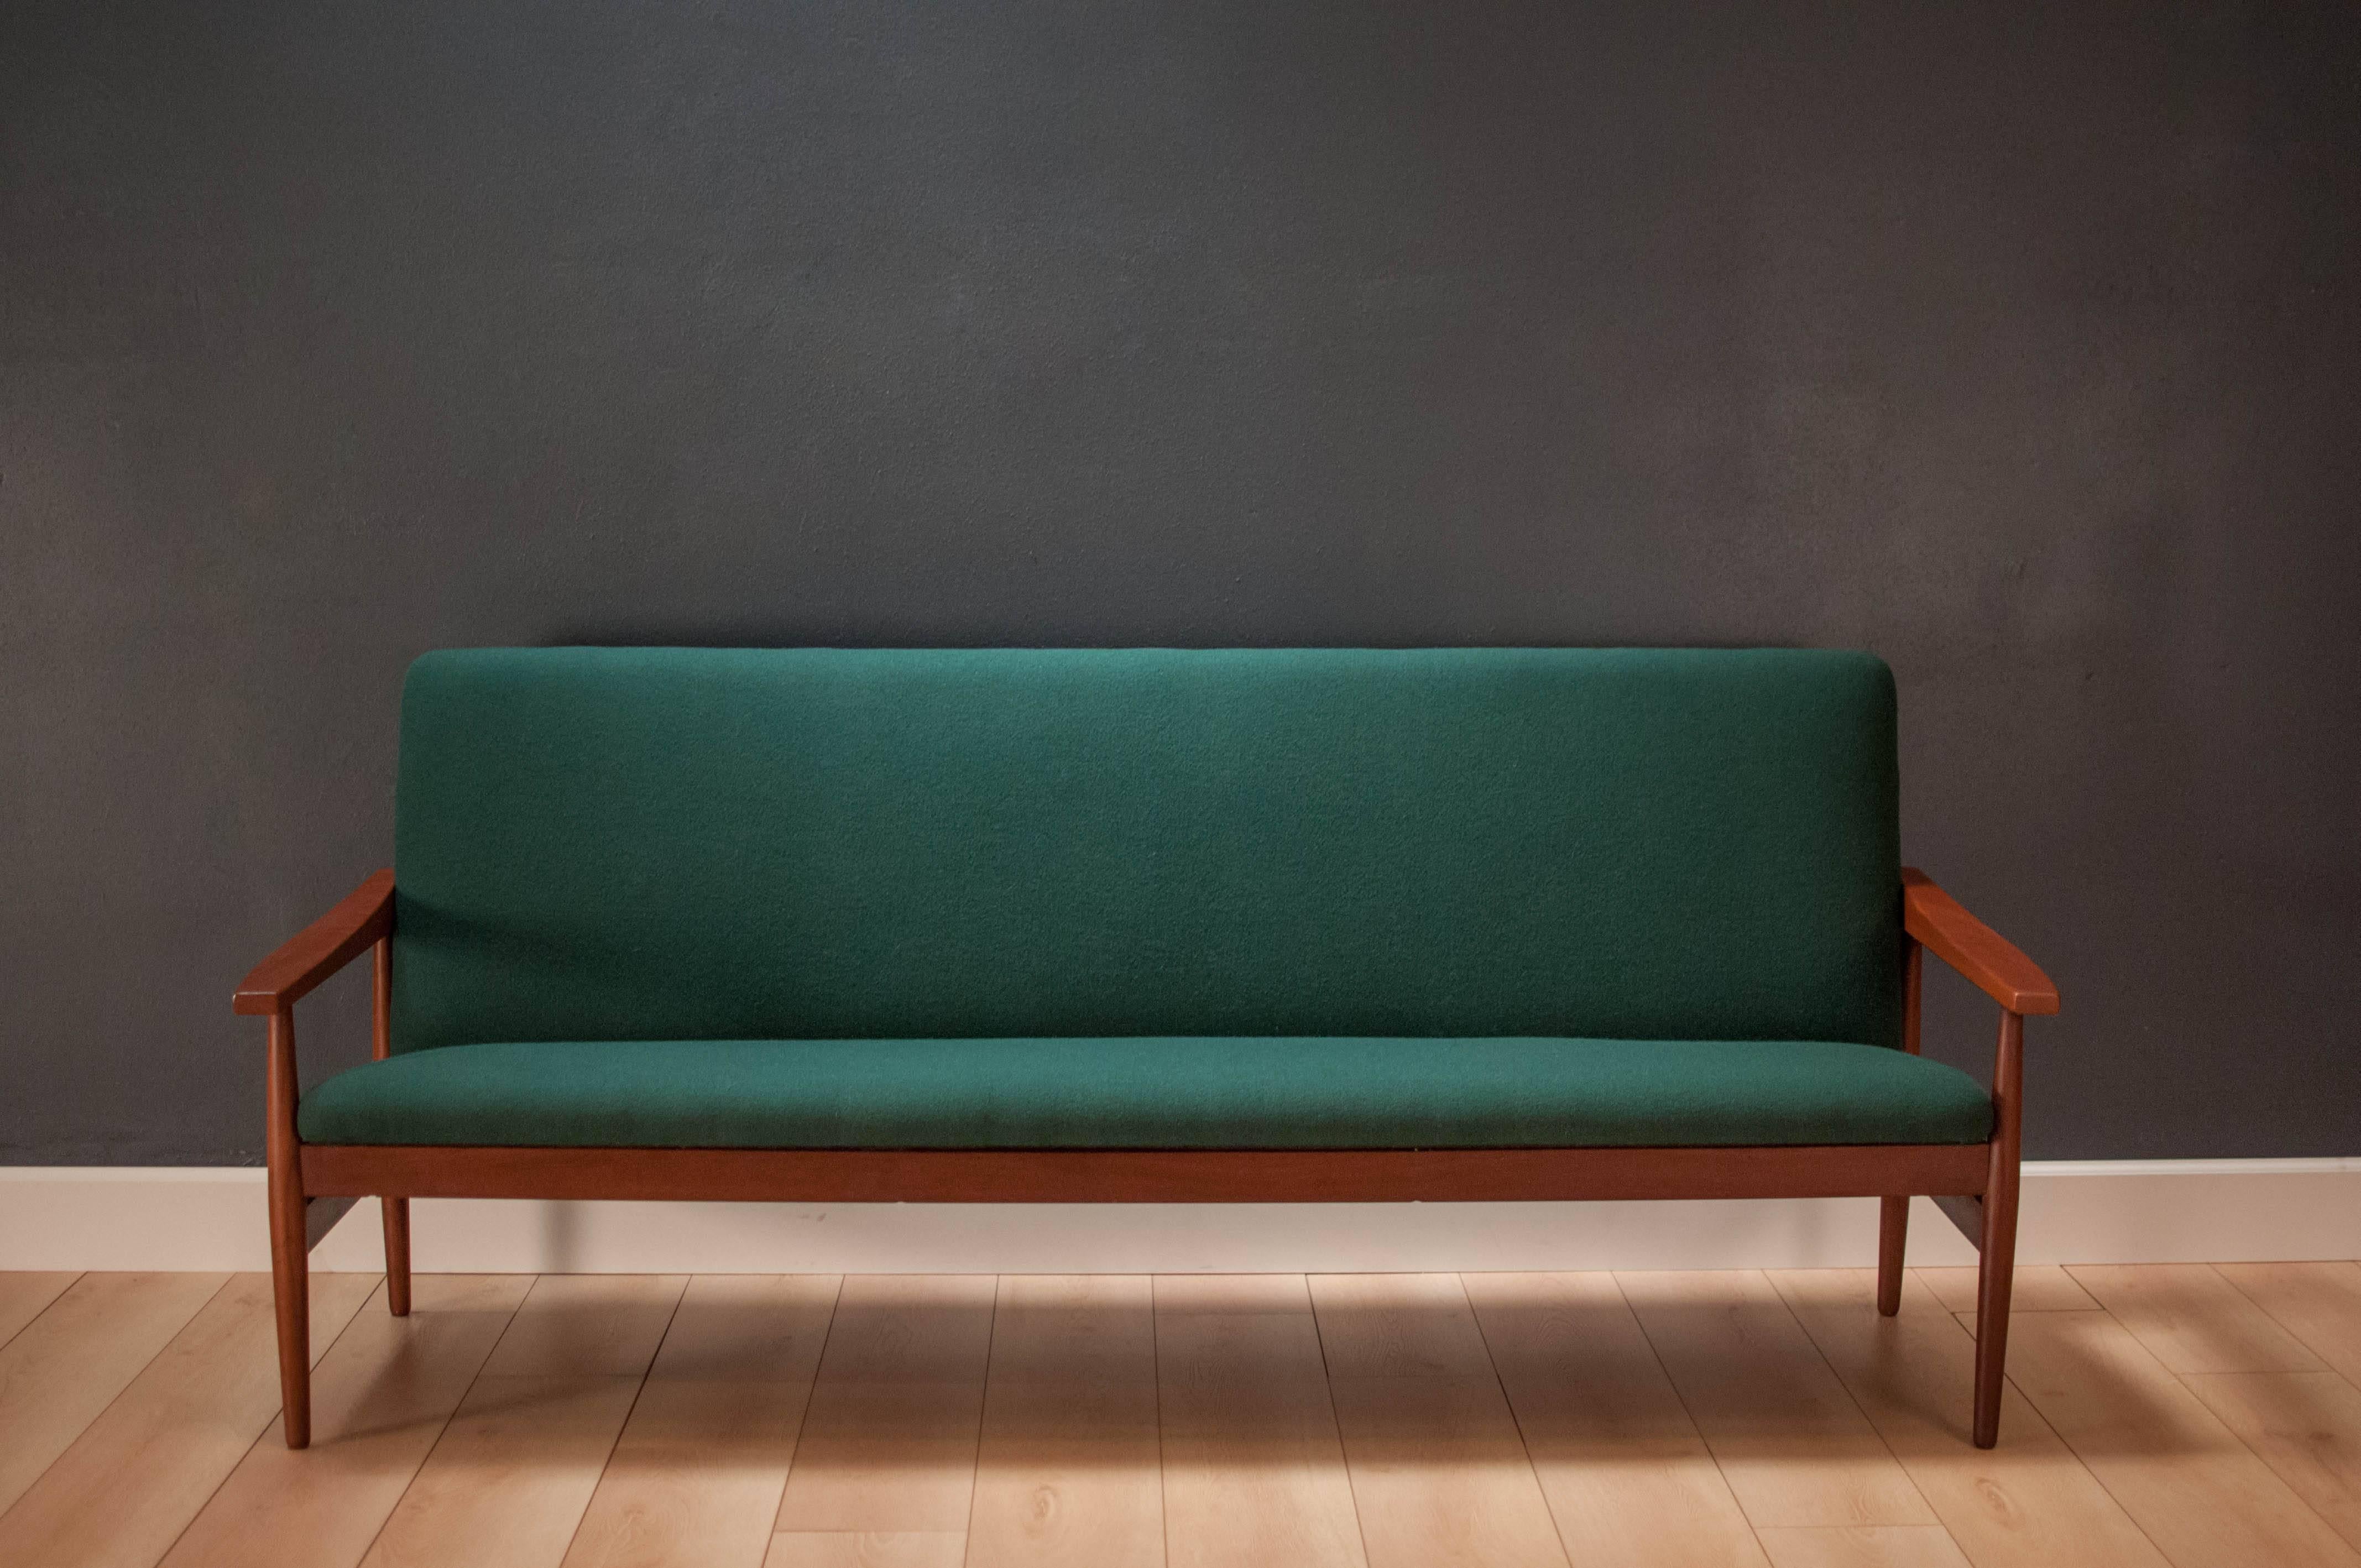 Vintage Mid-Century three-seat sofa in solid teak. This piece has been newly reupholstered in a vintage deadstock dark green wool fabric. Features a sculptural teak frame and displays well from any angle.

Dimensions: 75.5